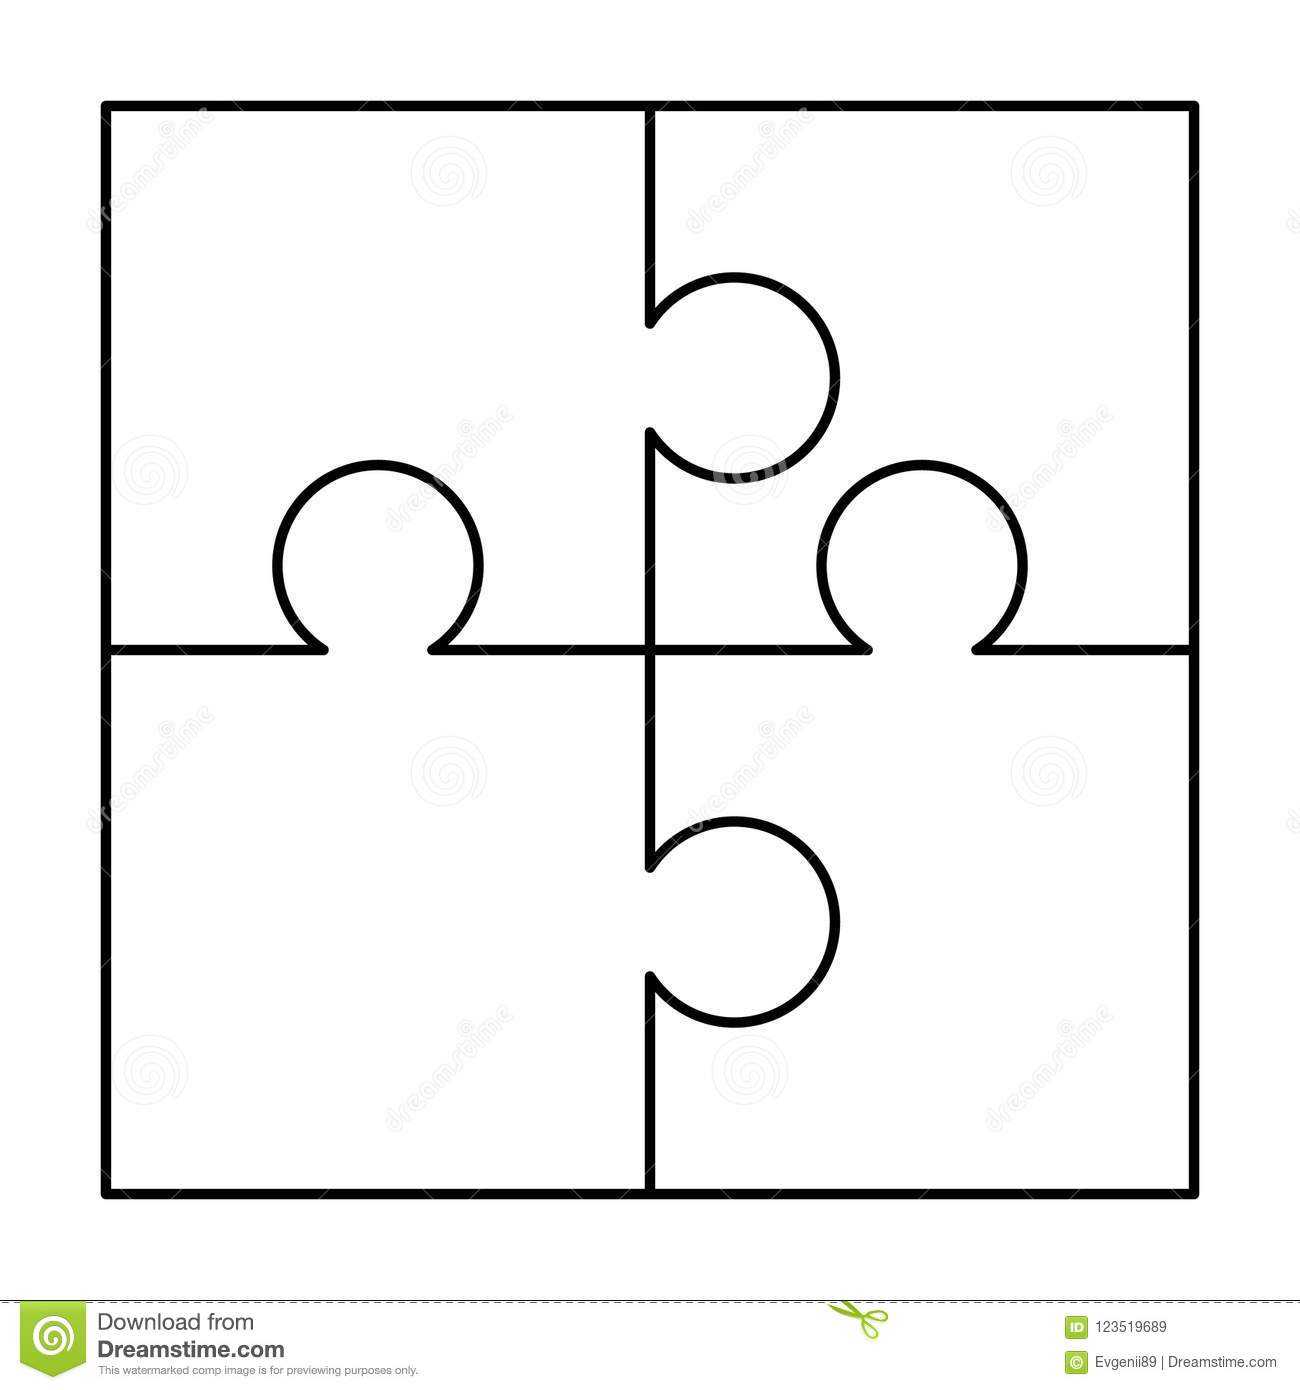 4 White Puzzles Pieces Arranged In A Square. Jigsaw Puzzle Throughout Jigsaw Puzzle Template For Word